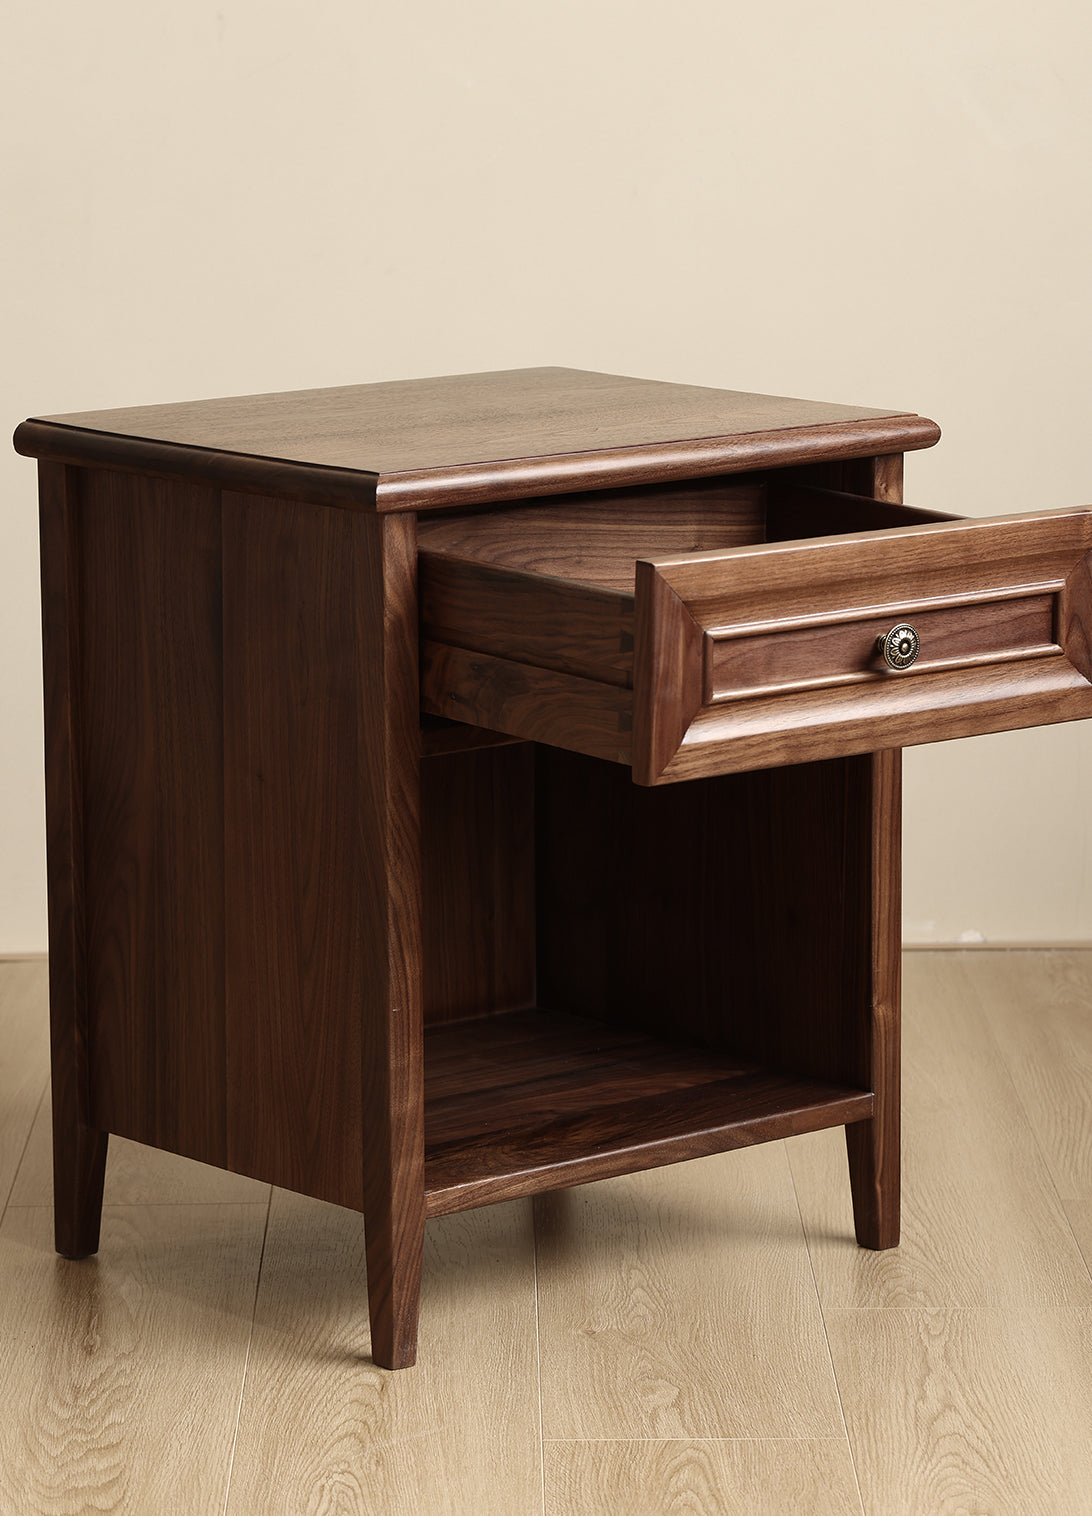 American style solid wood nightstand walnut bedside table